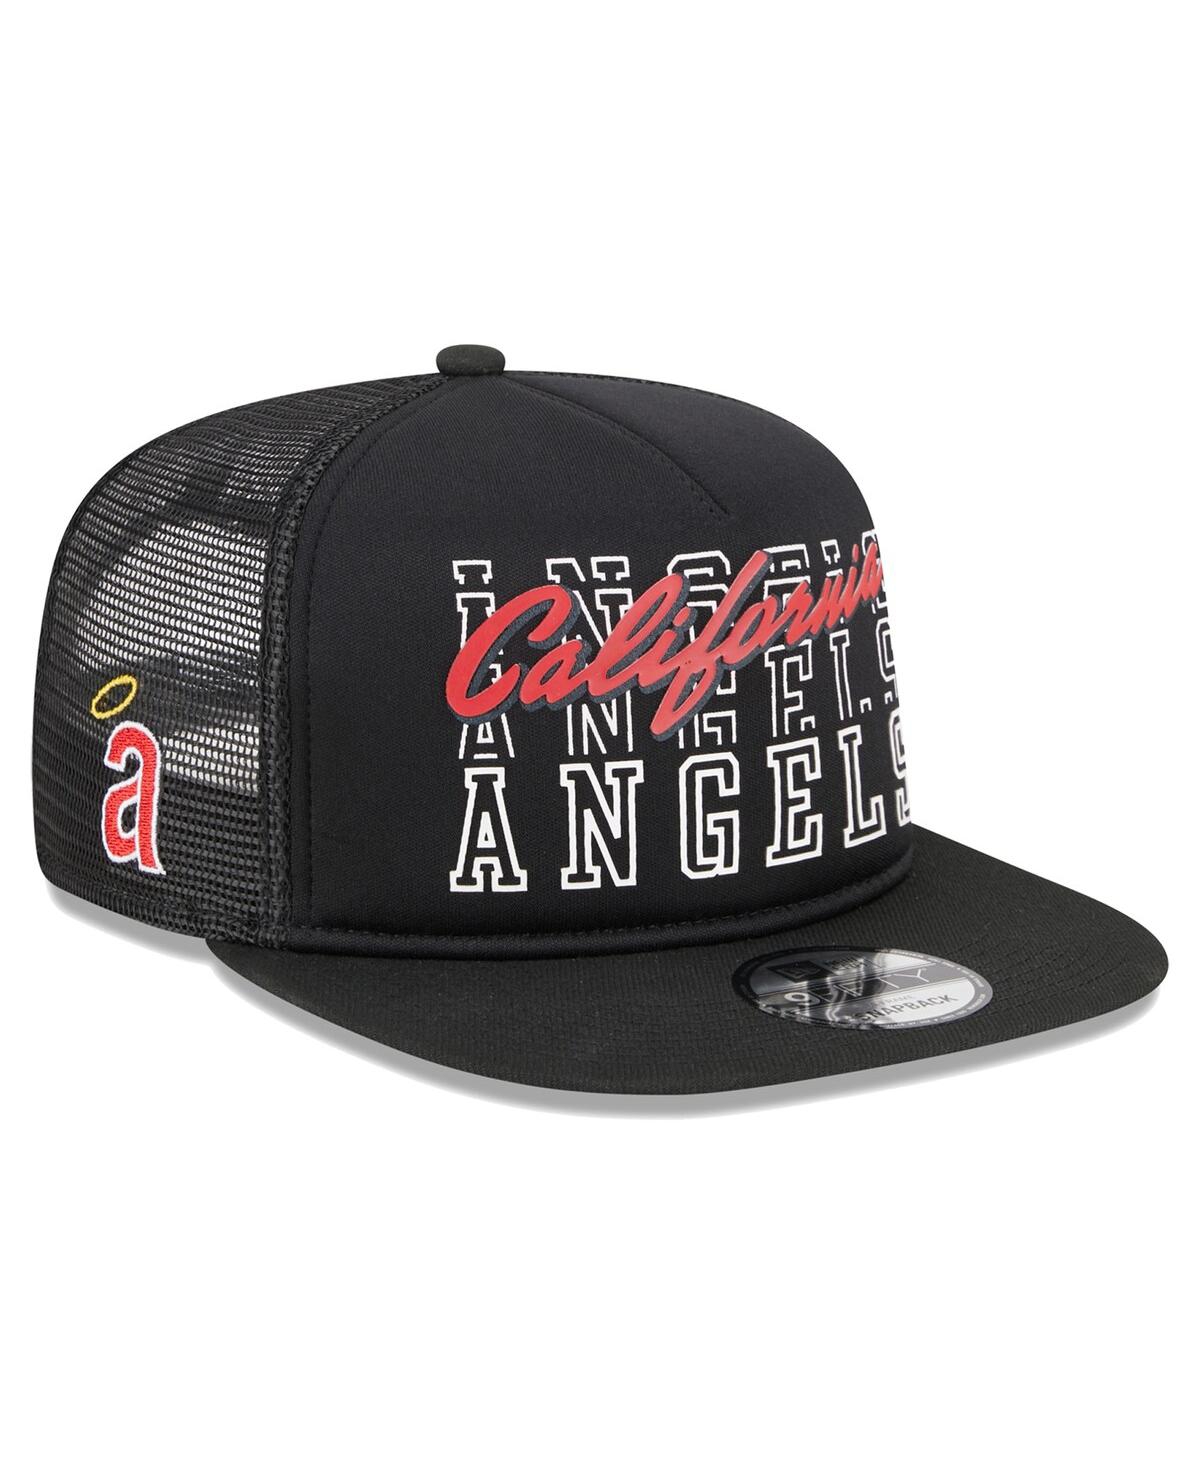 New Era Men's  Black California Angels Cooperstown Collection Street Team A-frame Trucker 9fifty Snap